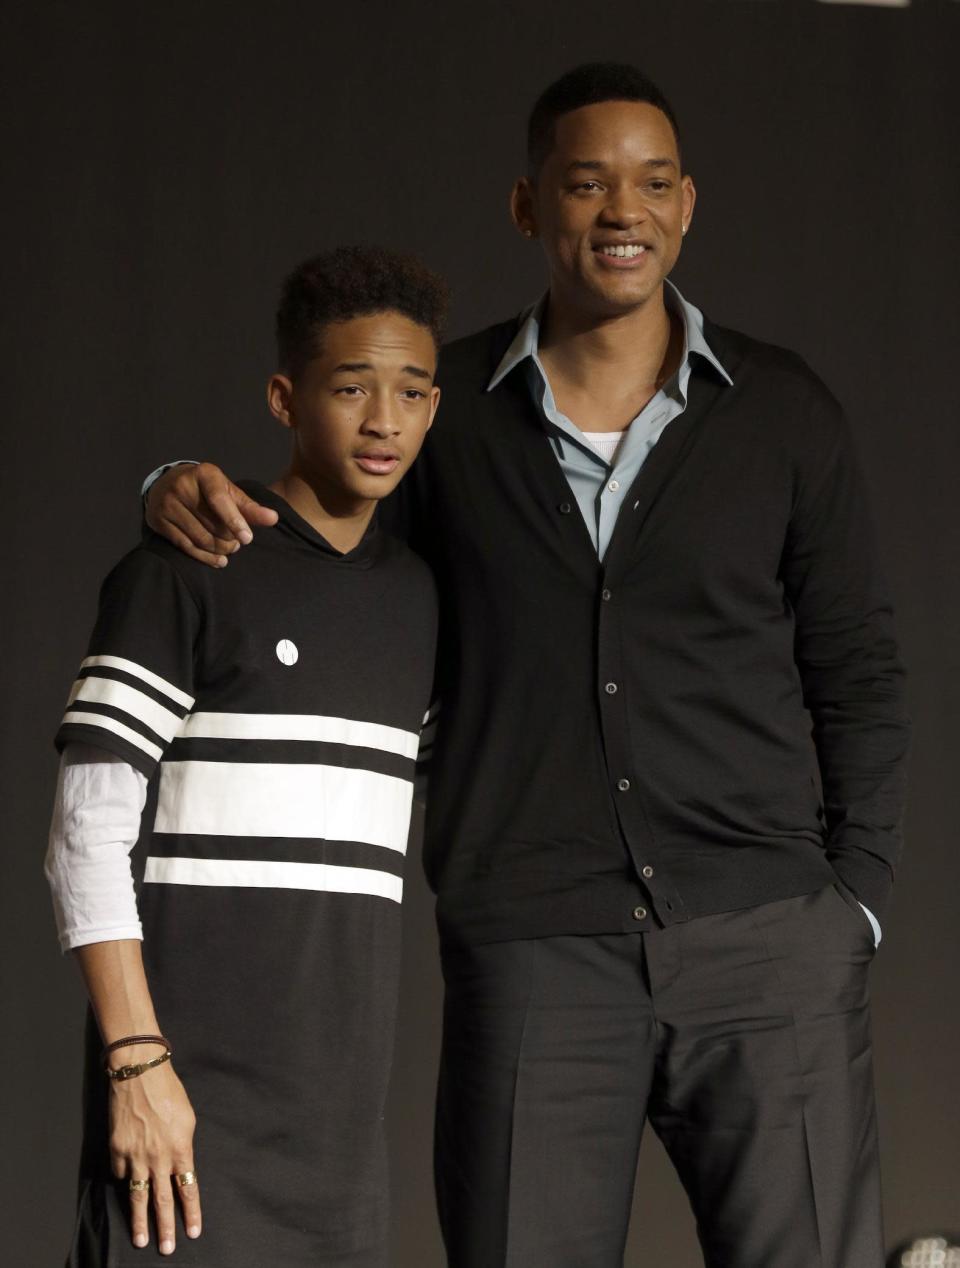 FILE - In this May 7, 2013 file photo, U.S. actor Will Smith and his son Jaden pose for the media after press conference for their film "After Earth" in Seoul, South Korea. Both actors were awarded Razzies for the film. Jaden was selected as worst actor for his role in the sci-fi flop about a father and son stranded on an untamed earth, while the elder Smith was chosen as worst supporting actor at the Golden Raspberry Awards, on Saturday, March 1, 2014, which lampoons Hollywood's awards season on the eve of the Oscars. (AP Photo/Lee Jin-man, file)